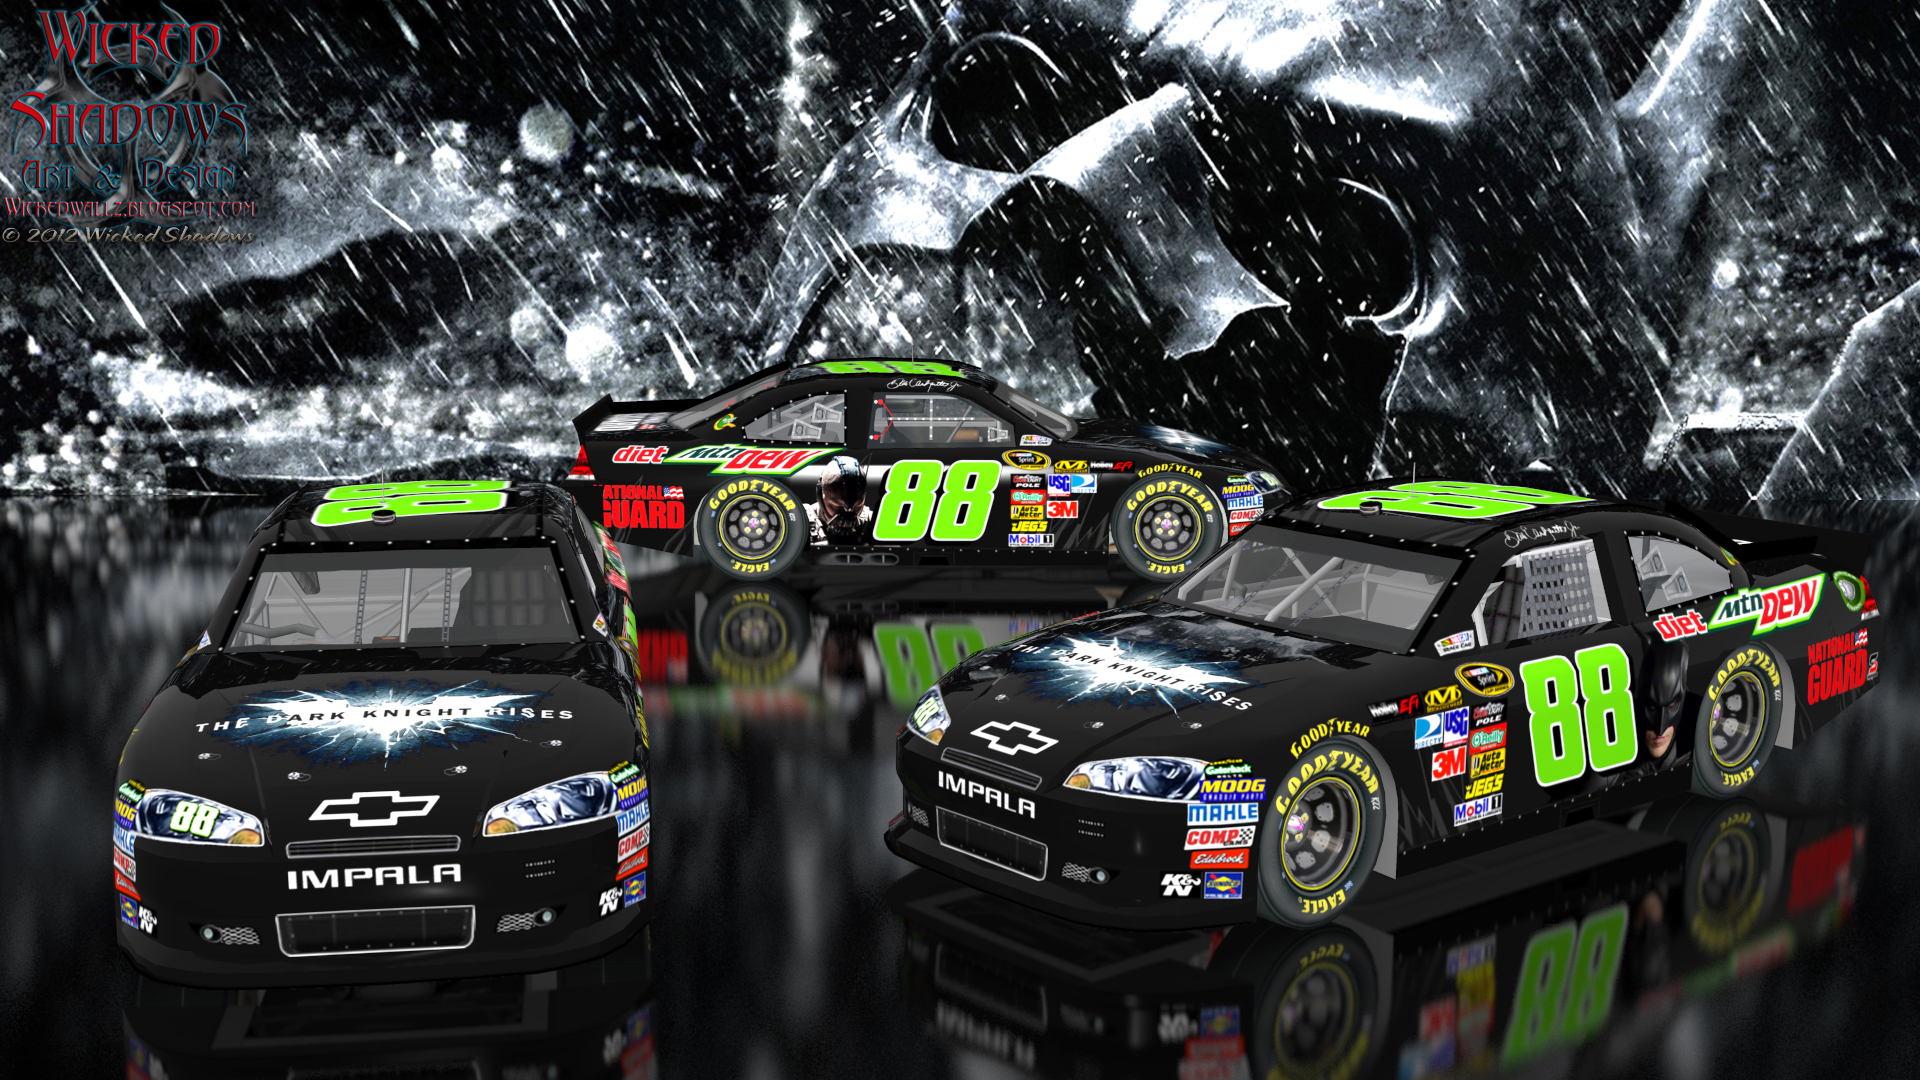 Wallpapers By Wicked Shadows Dale Earnhardt Jr The Dark Knight Rises 1920x1080